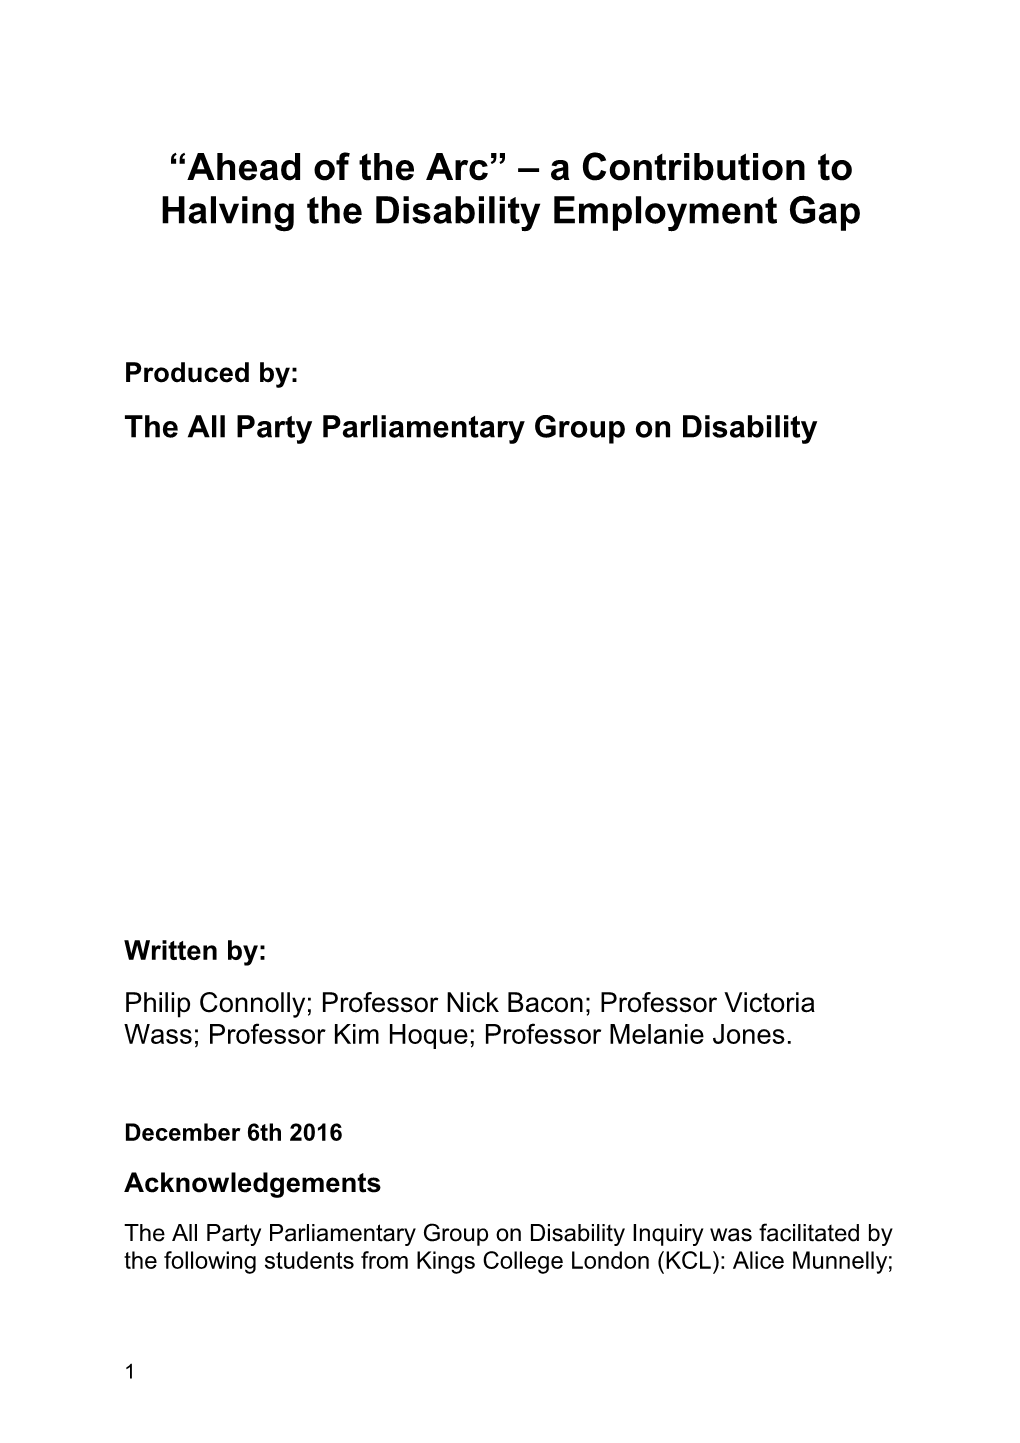 Ahead of the Arc a Contribution to Halving the Disability Employment Gap